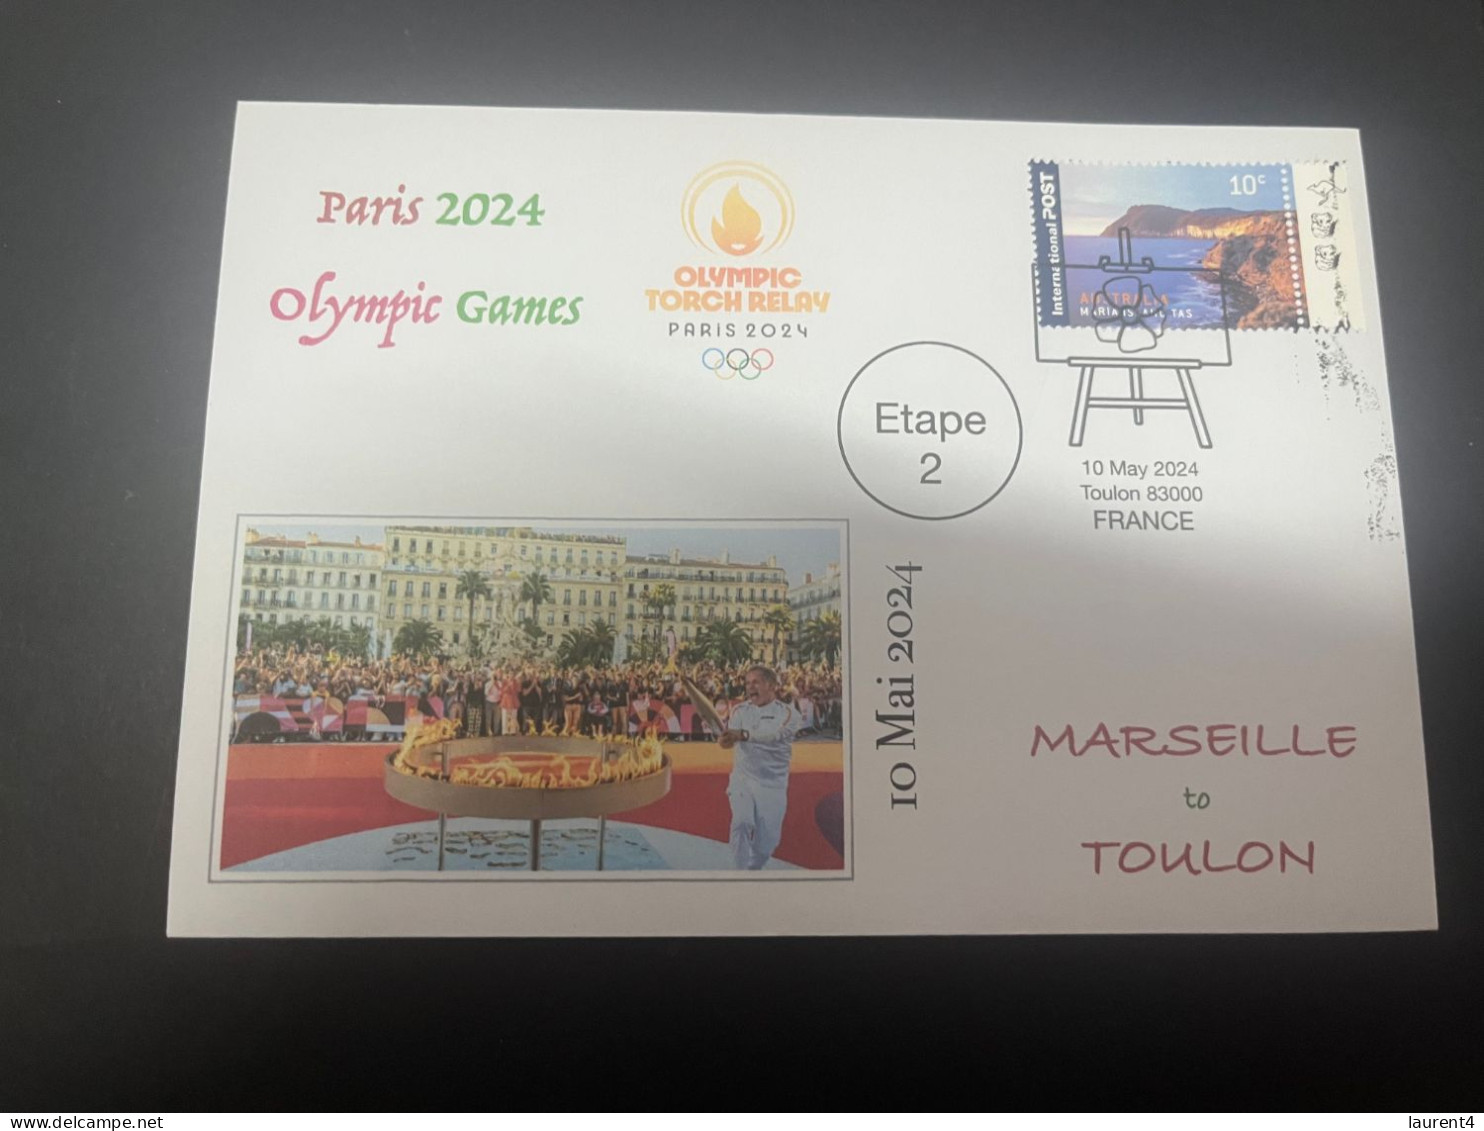 11-5-2024 (4 Z 42) Paris Olympic Games 2024 - Torch Relay (Etape 2) In Toulon (10-5-2024) With OZ Stamp - Summer 2024: Paris